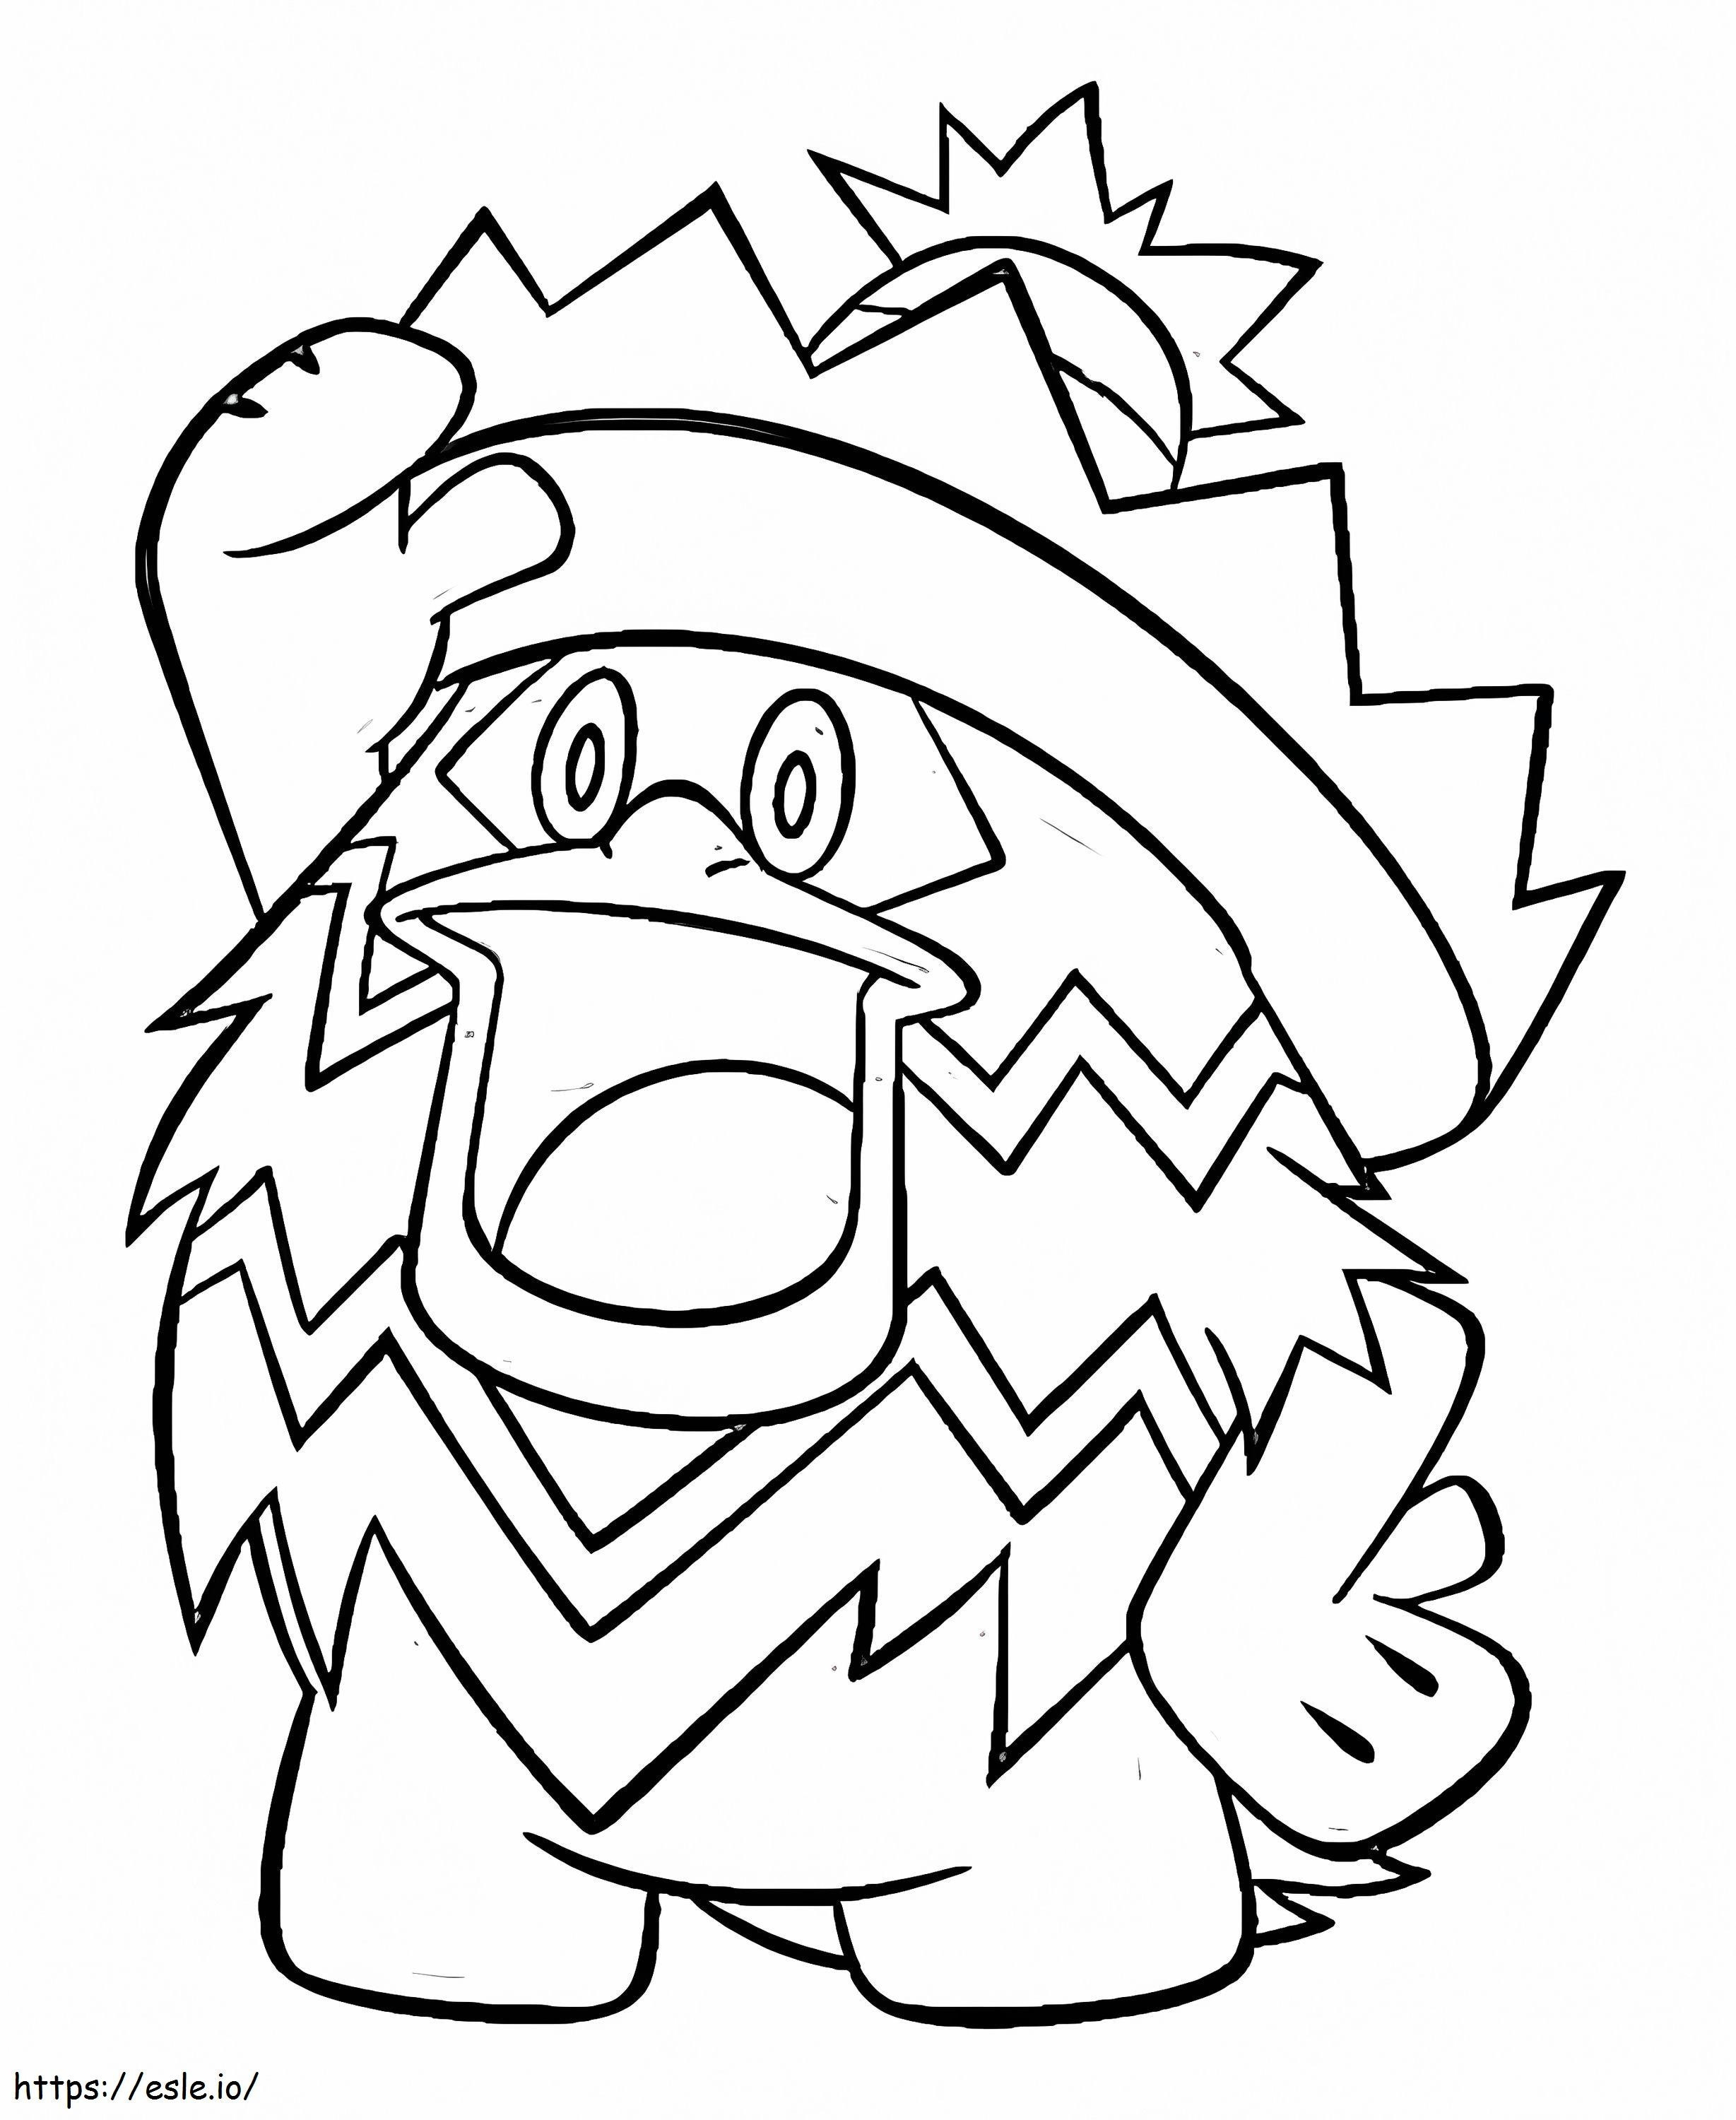 Adorable Playful coloring page